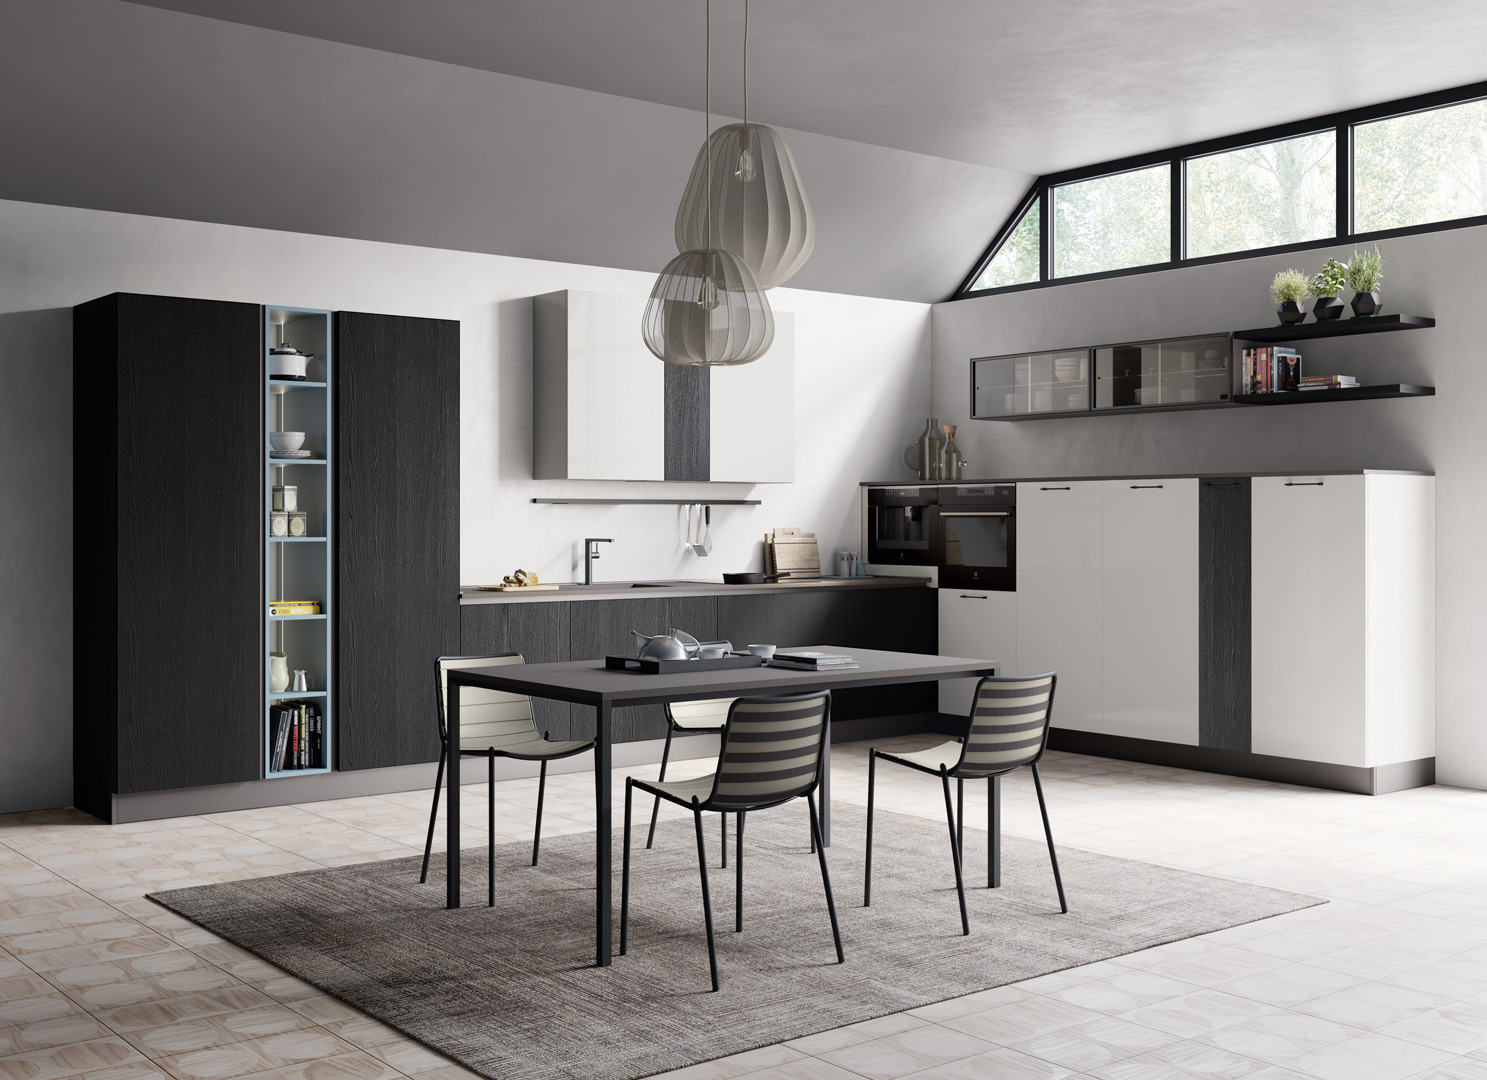 7965_creo-kitchens-tablet-wood-compo-2-2